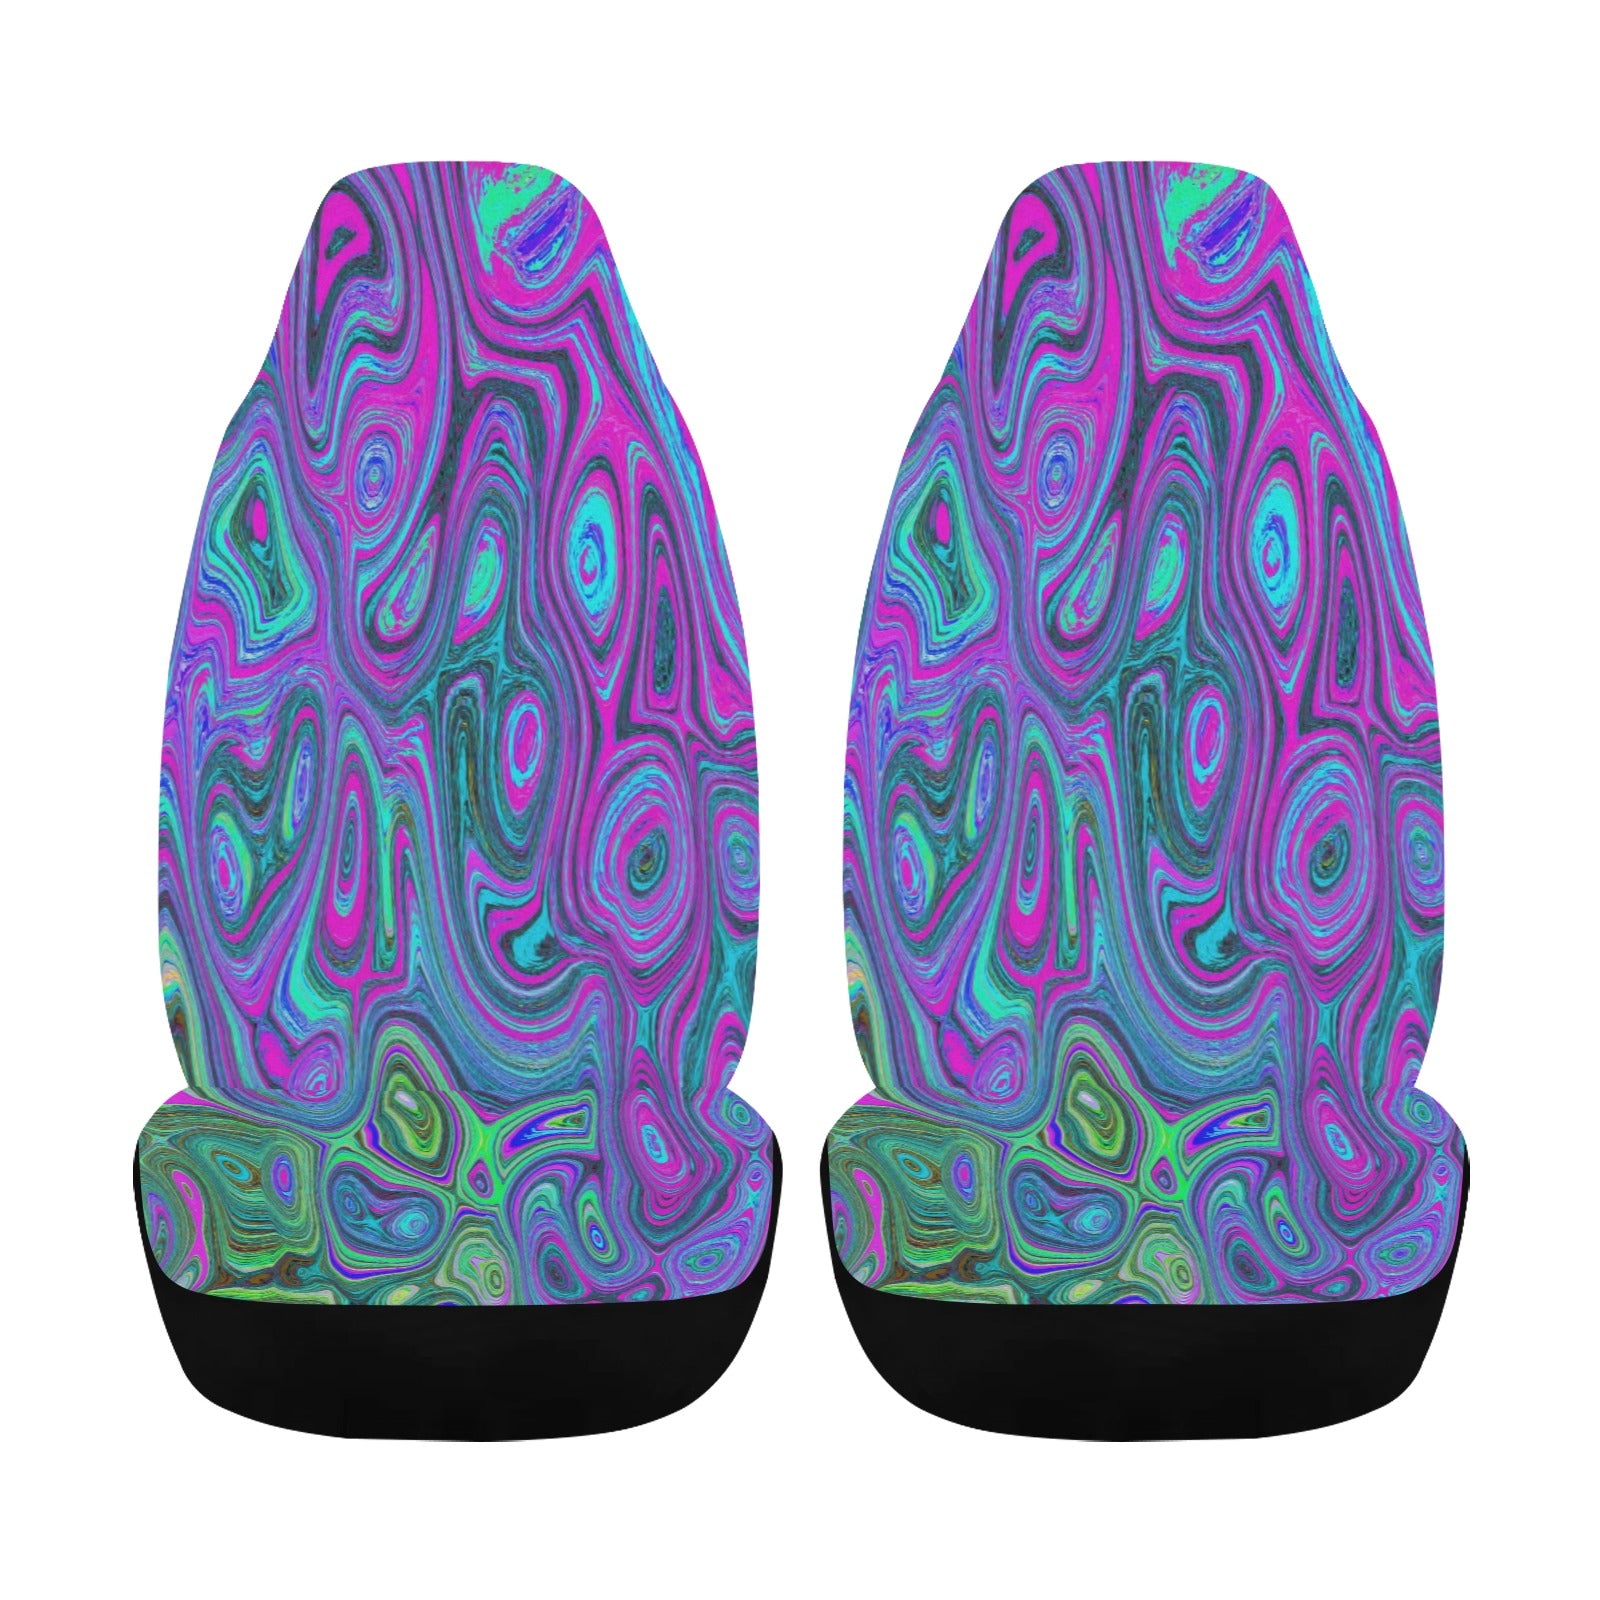 Car Seat Covers, Marbled Magenta and Lime Green Groovy Abstract Art